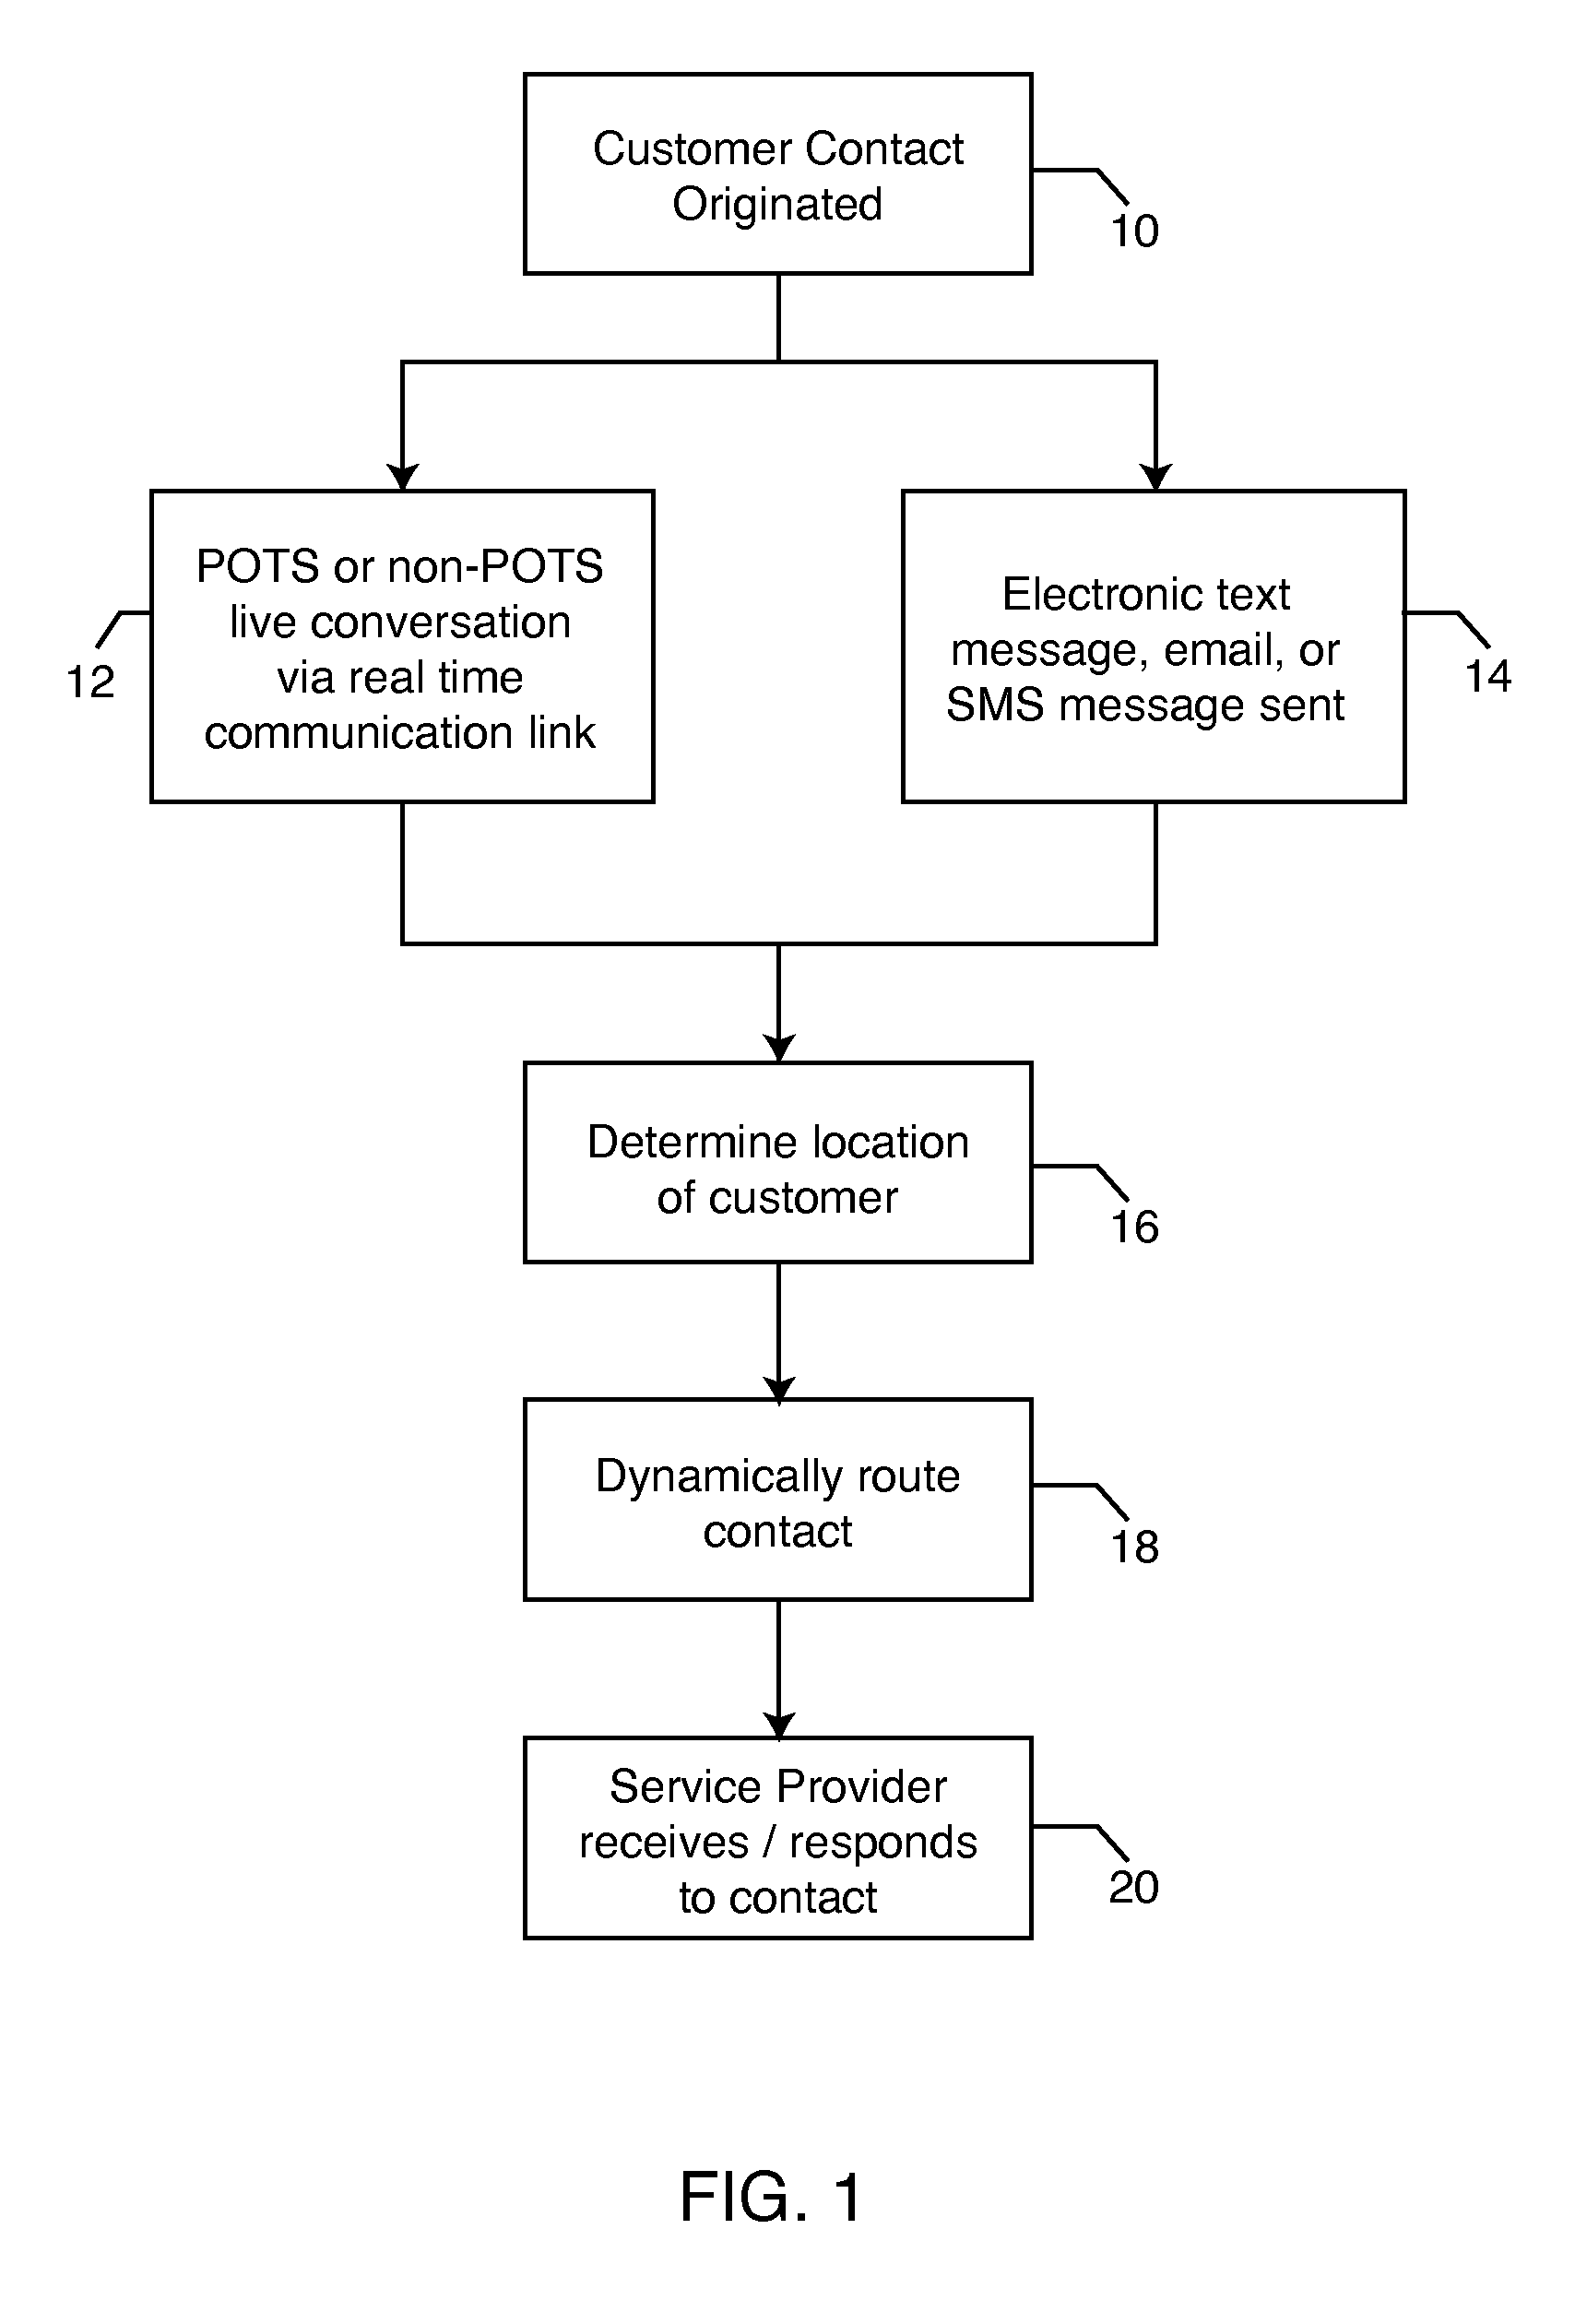 Process for dynamic routing of customer contacts to service providers in real time